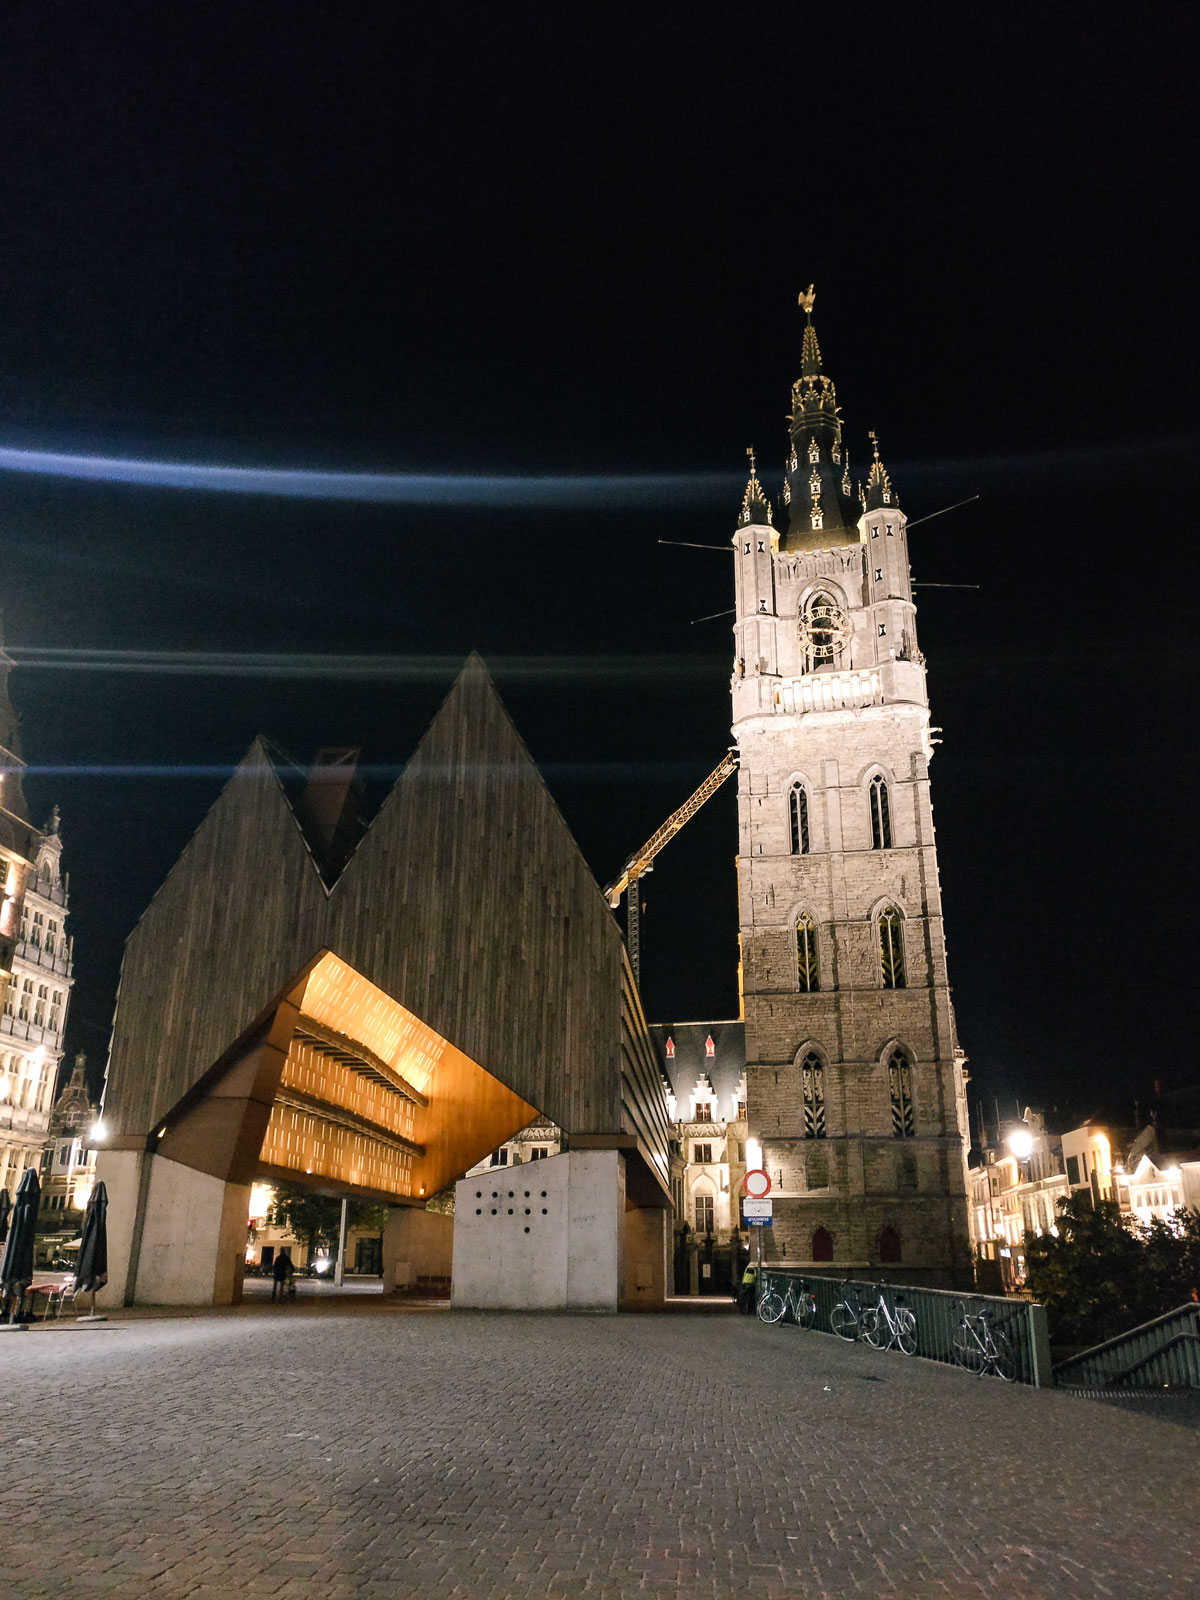 A photo of both the Ghent Stadshal & Belfry at night